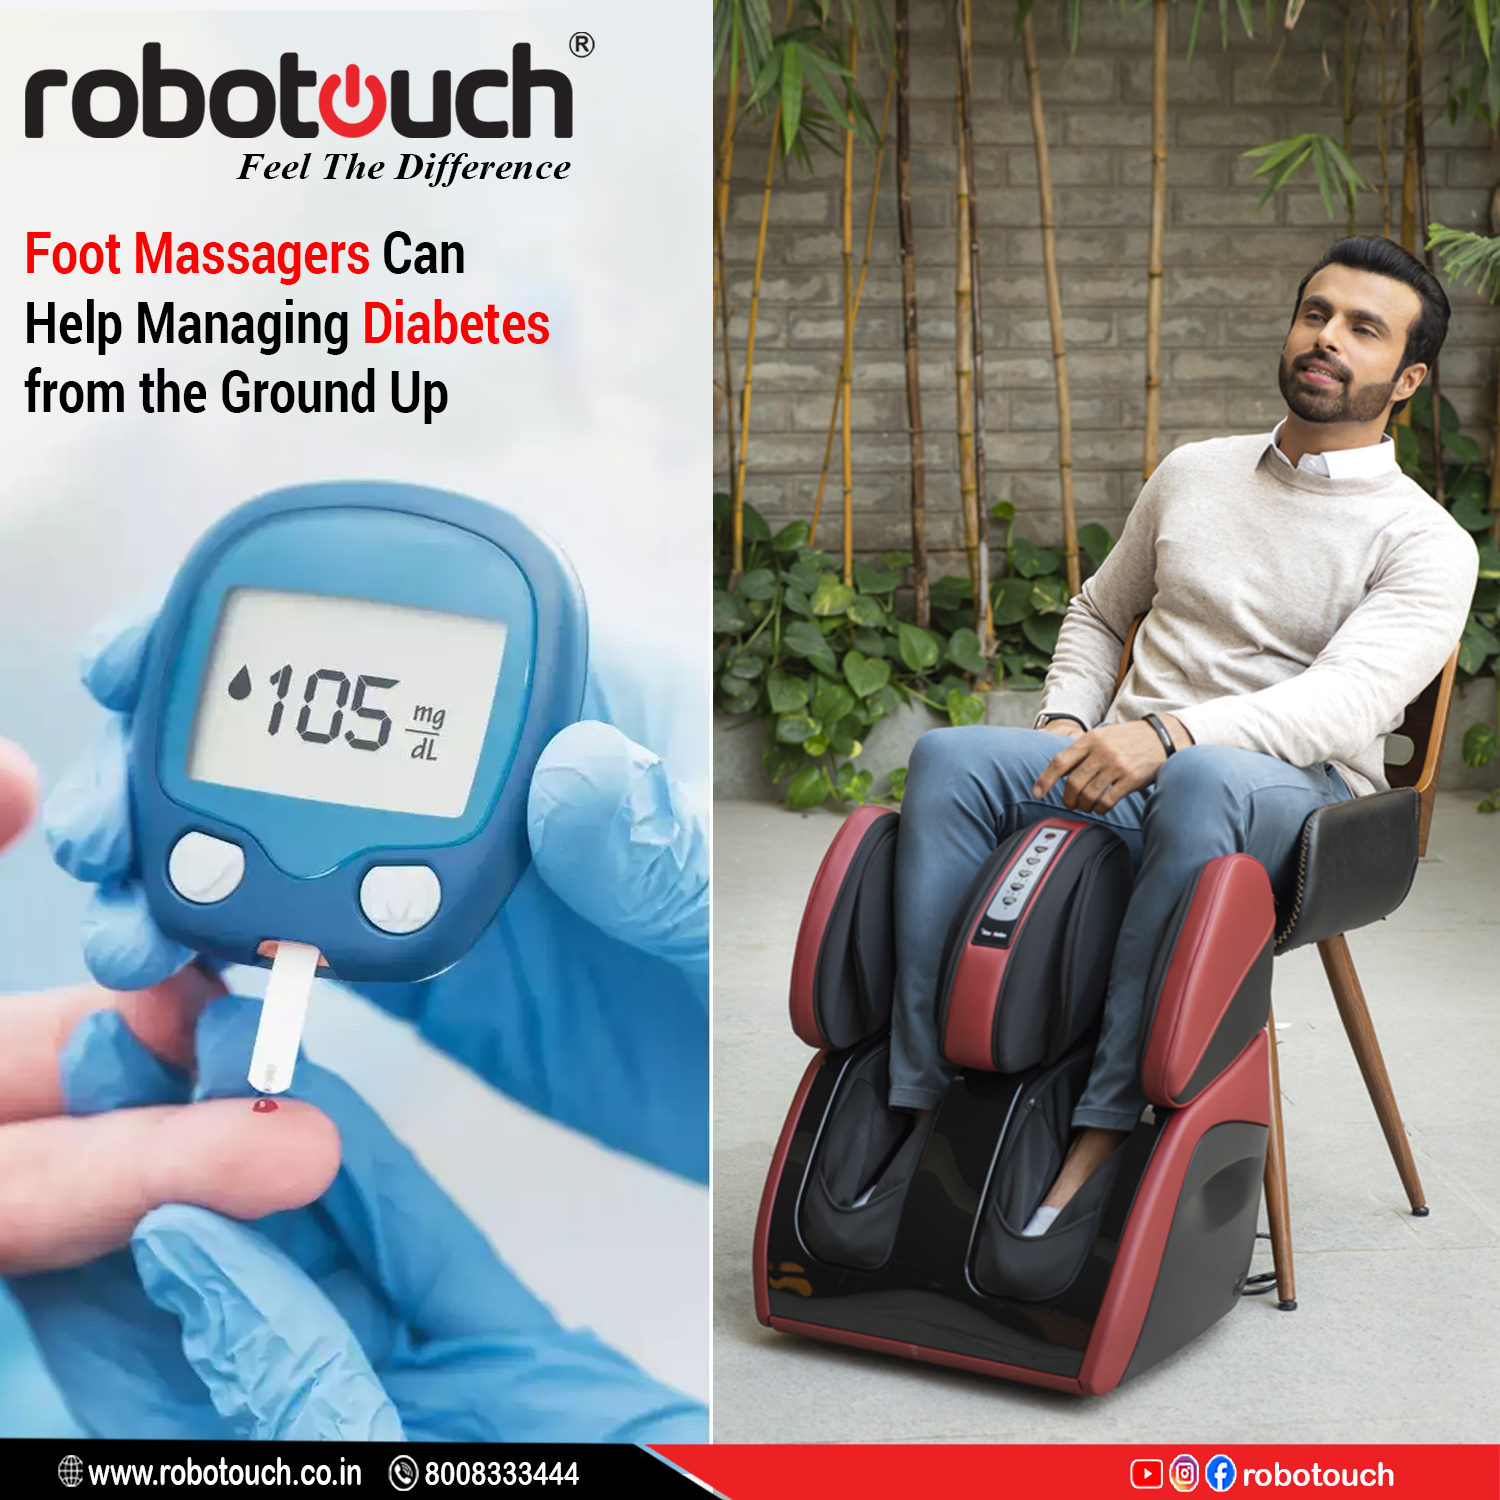 Use of foot massagers for patients with diabetes